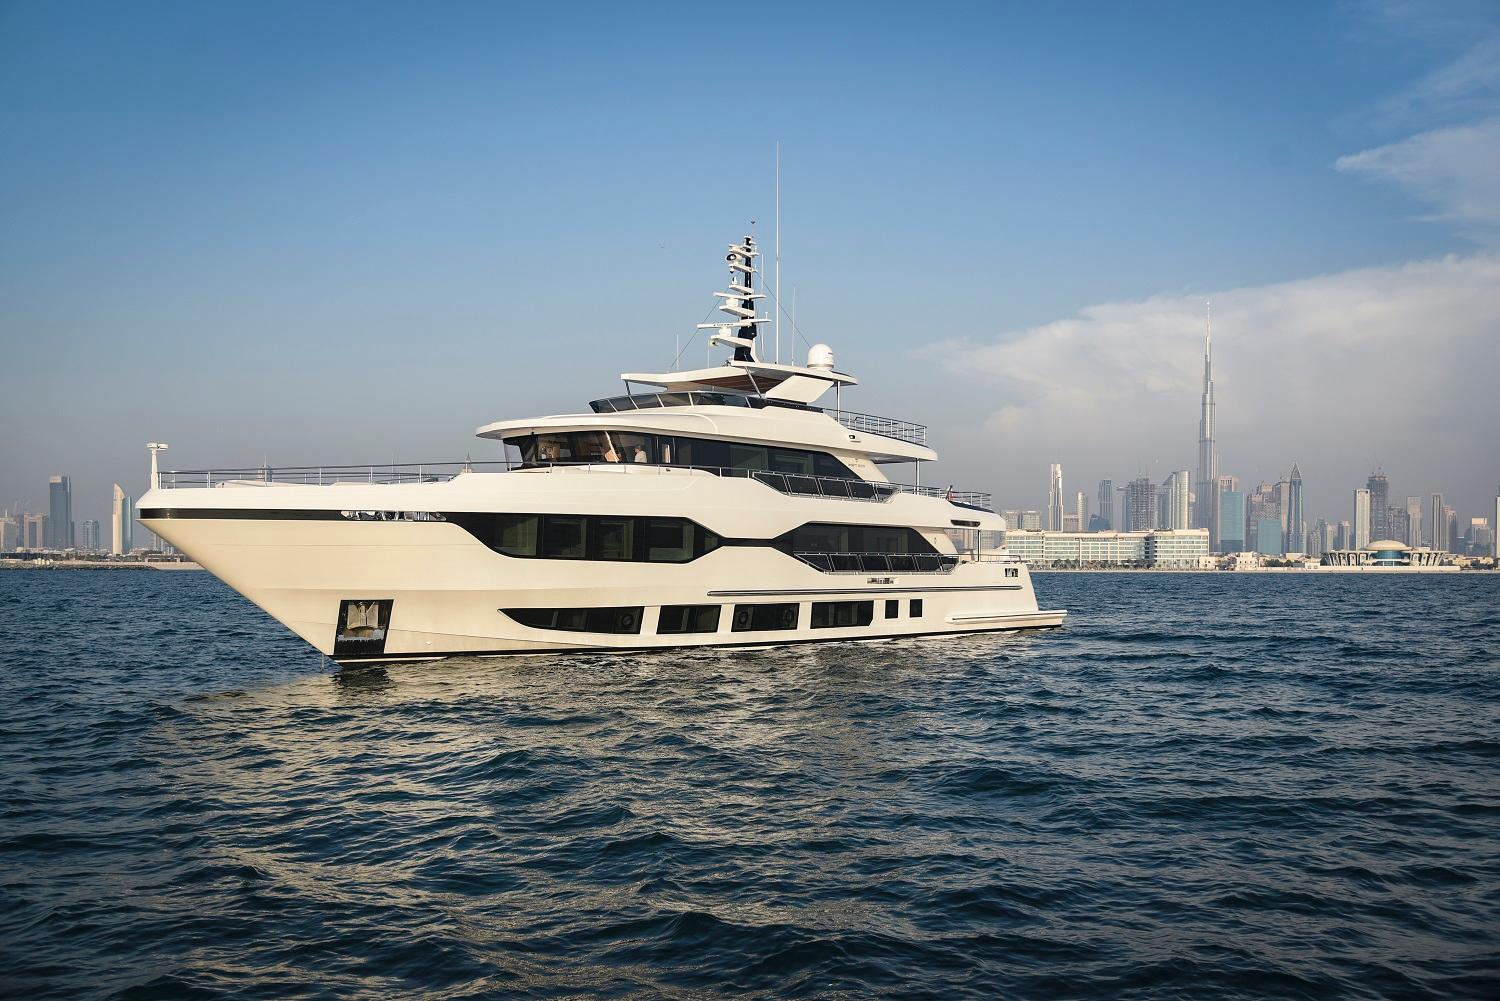  Yacht Photos Pics Manufacturer Provided Image: Manufacturer Provided Image